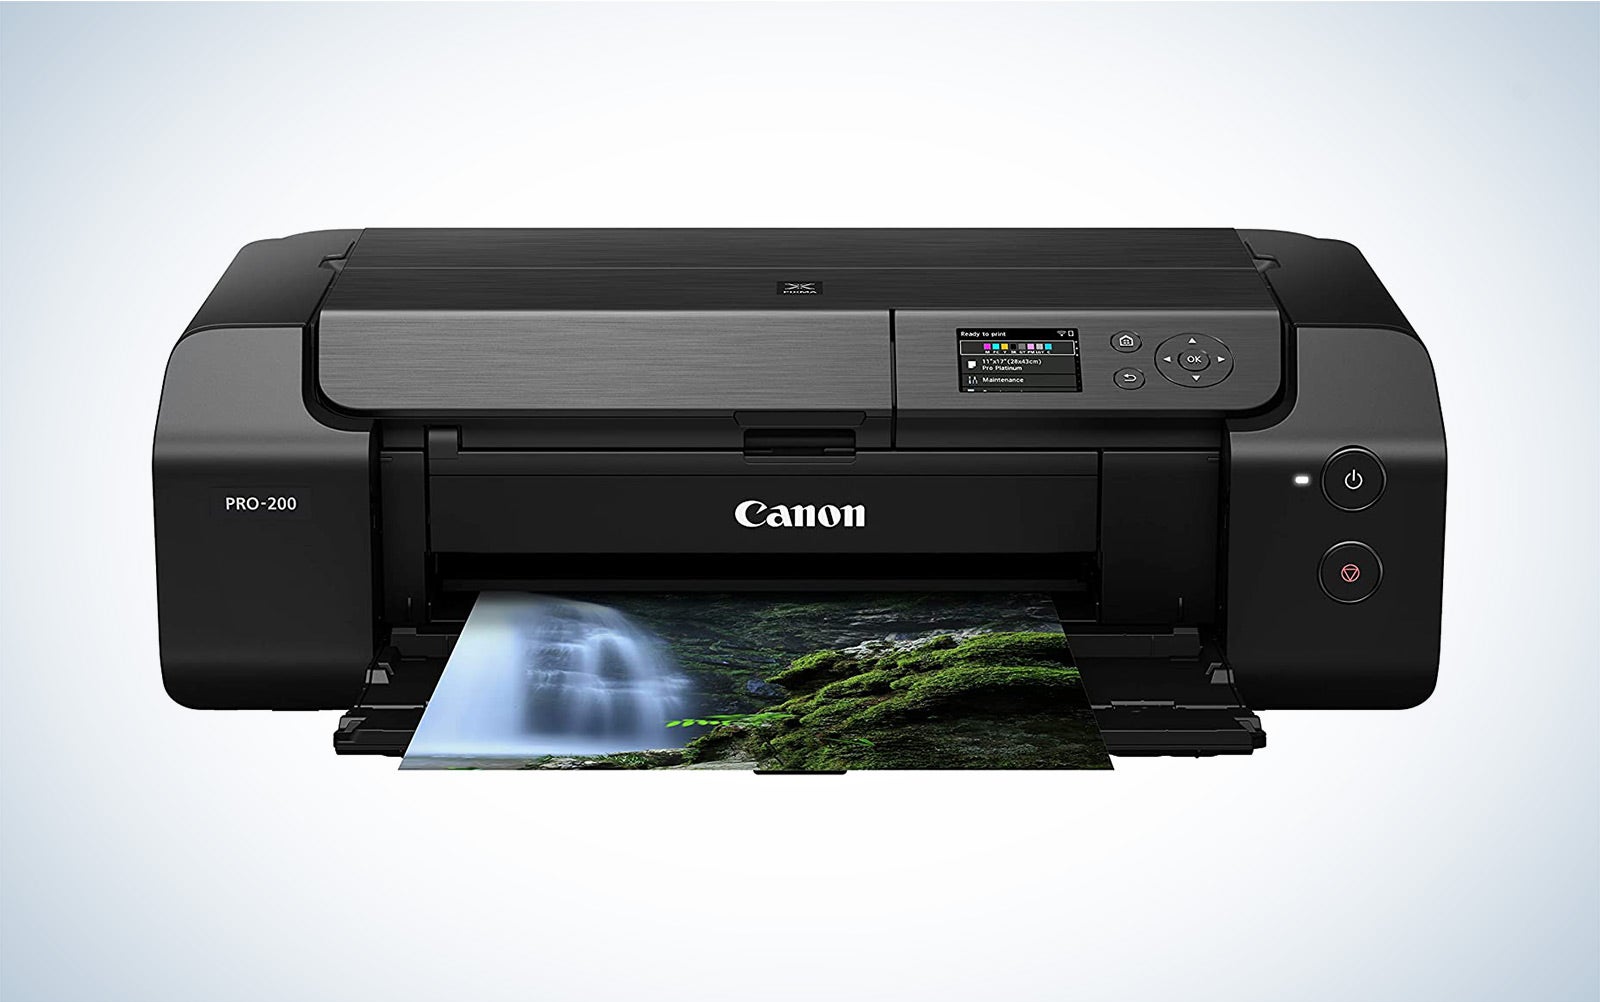 The Canon PIXMA PRO-200 is the best photo printer overall.